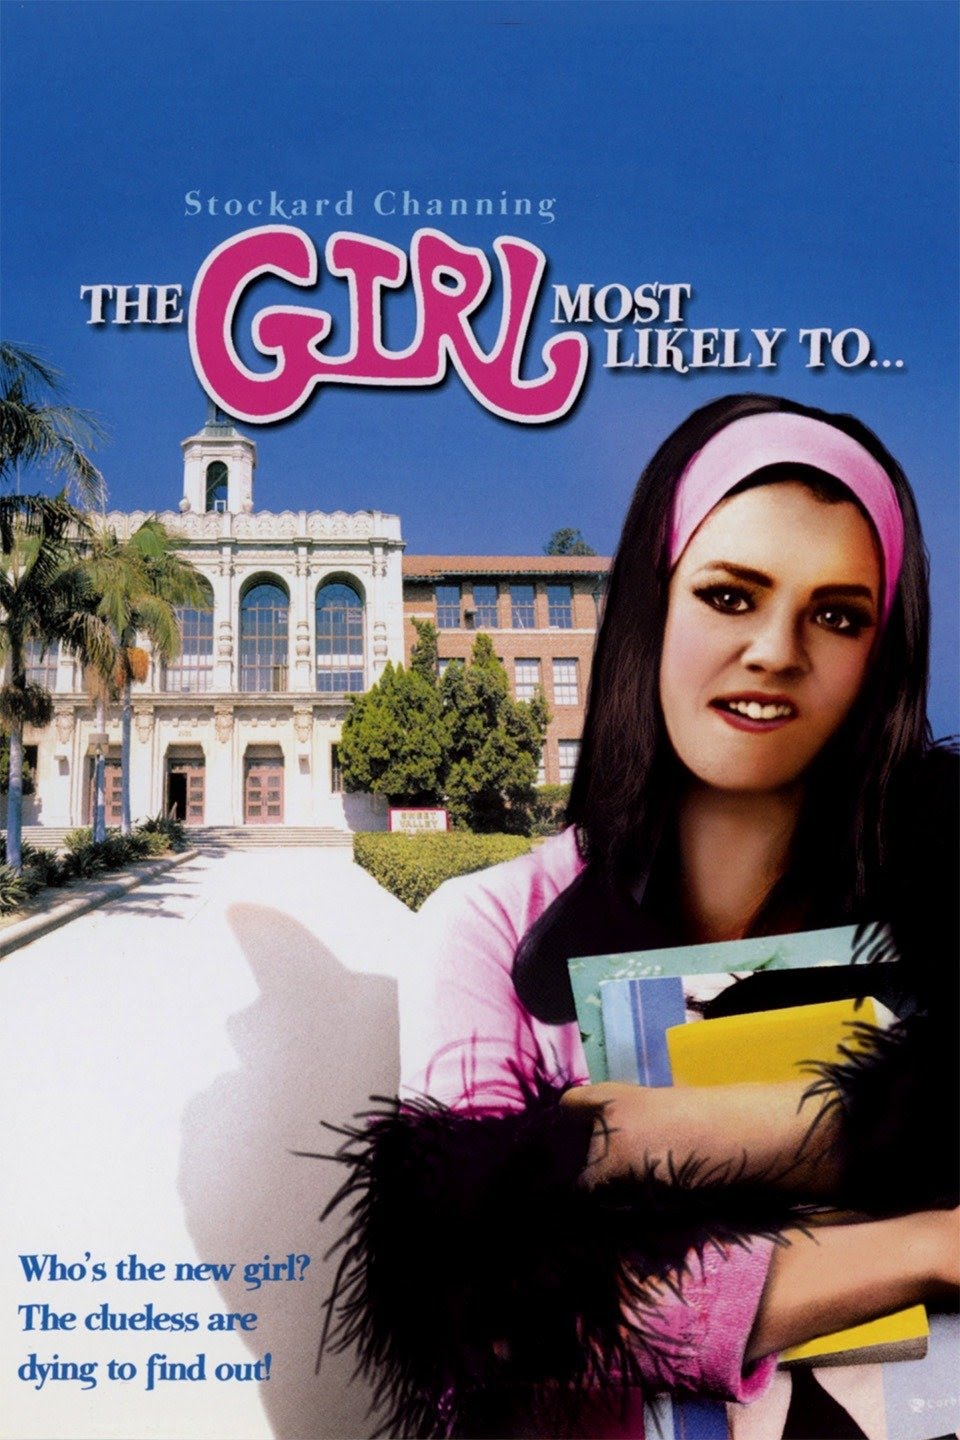 The Girl Most Likely to... (1973) starring Stockard Channing on DVD on DVD